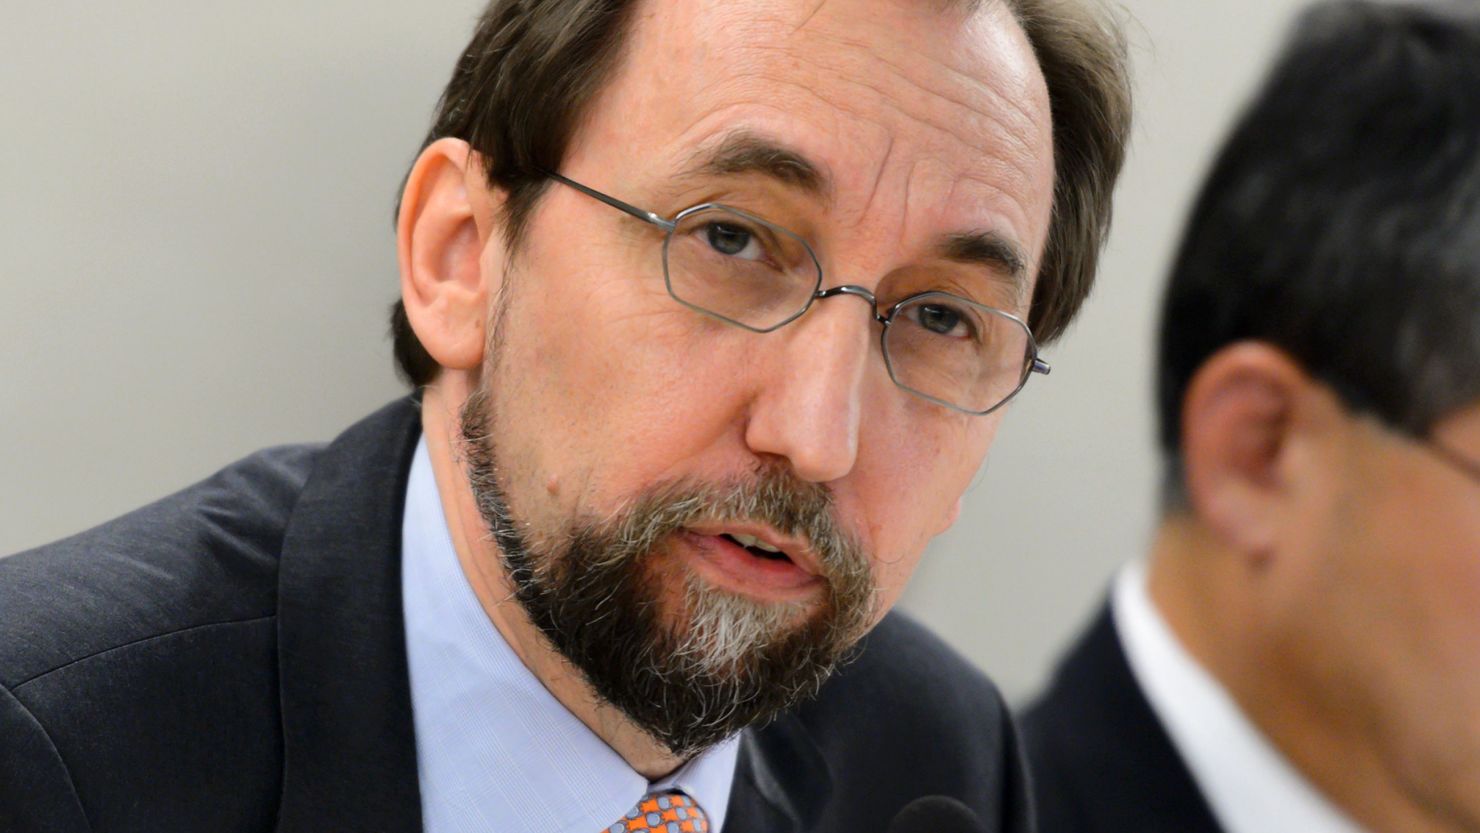 UN High Commissioner for Human Rights Zeid Ra'ad Al Hussein called out Western populist politicians.